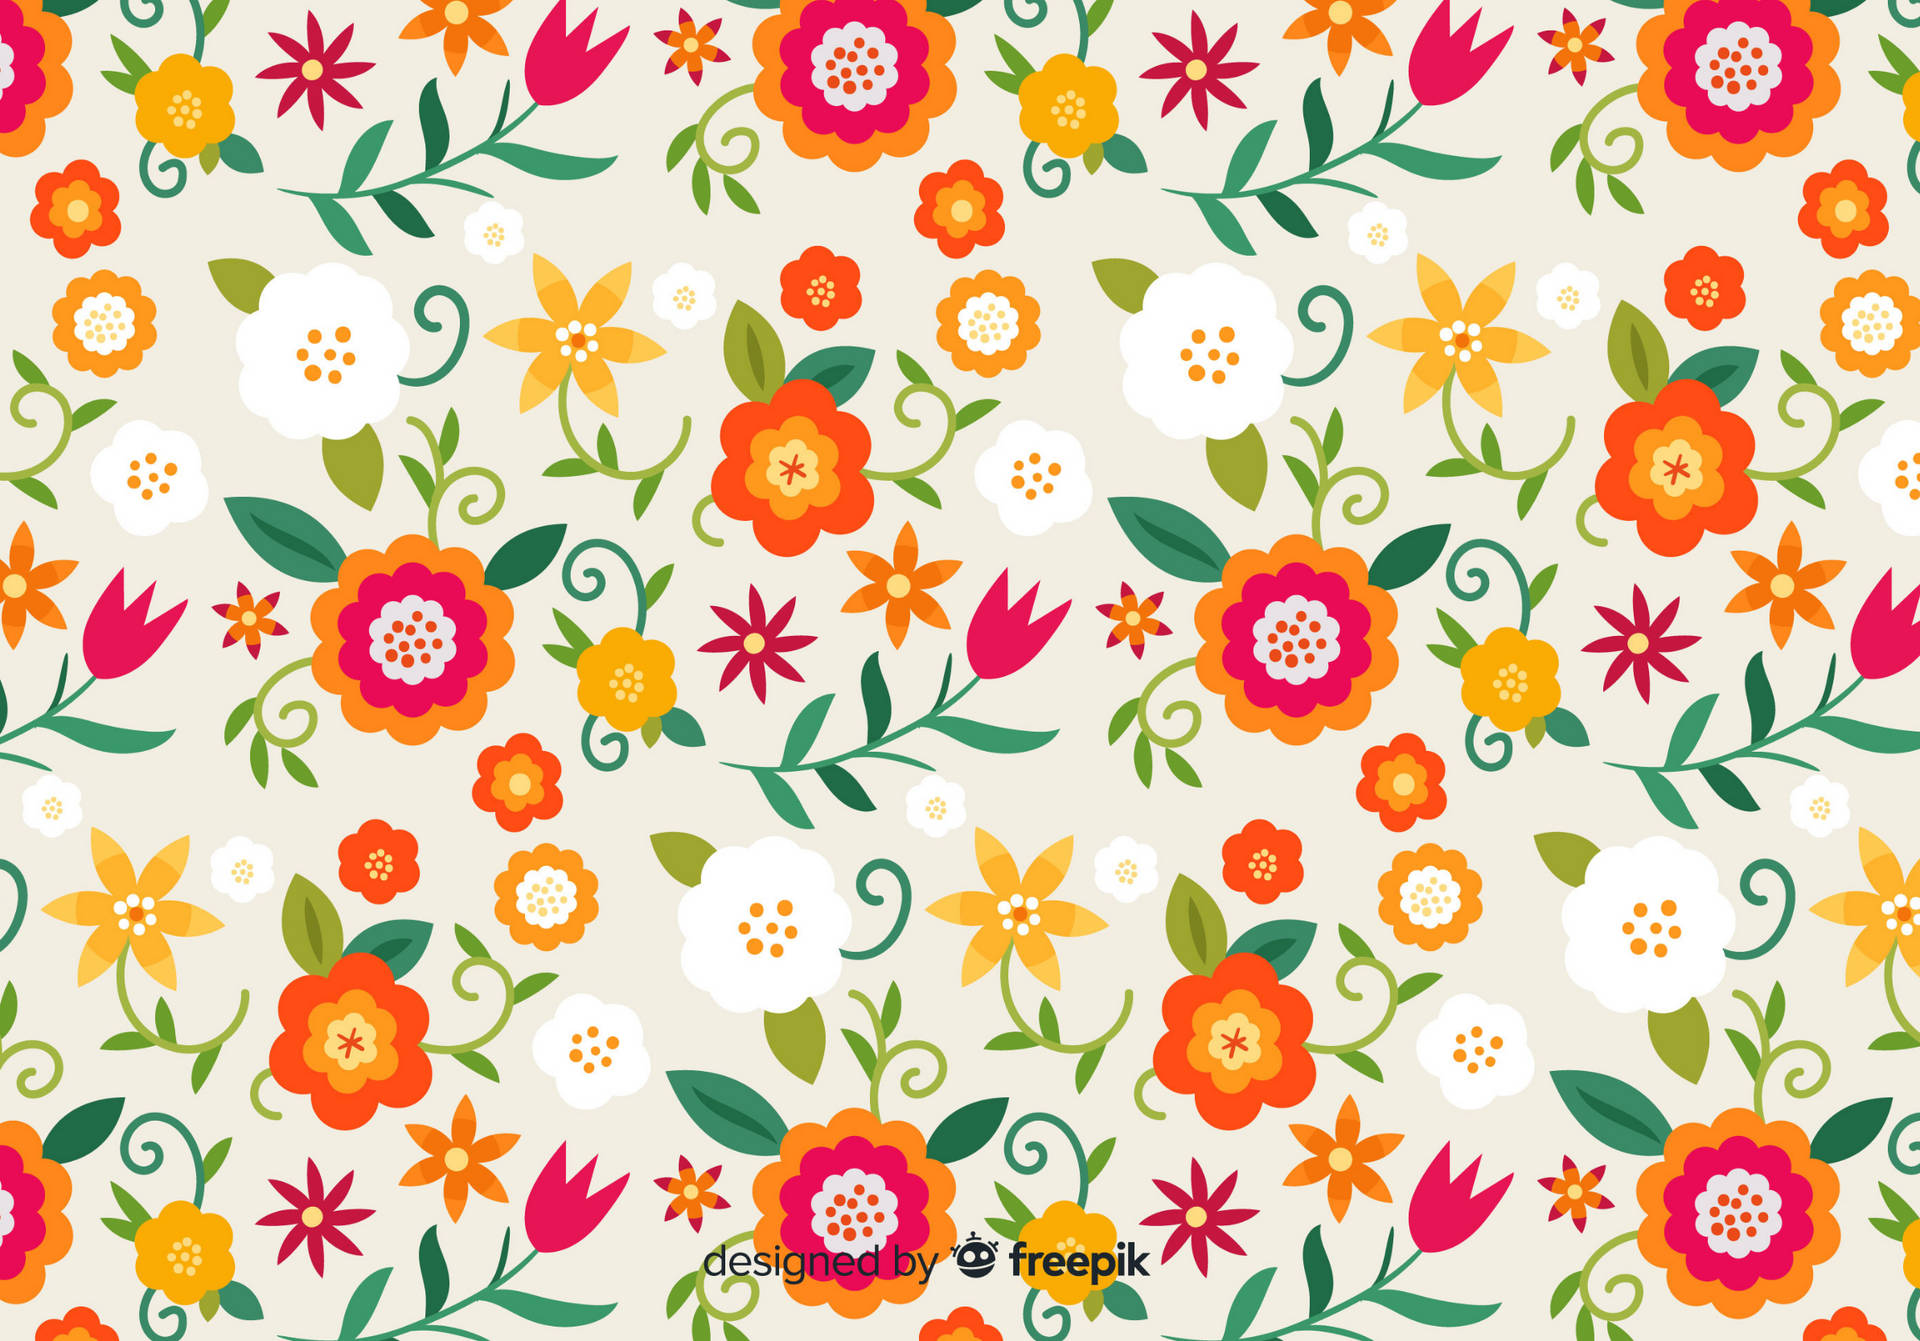 Ipad Pro Cute Floral Pattern Background